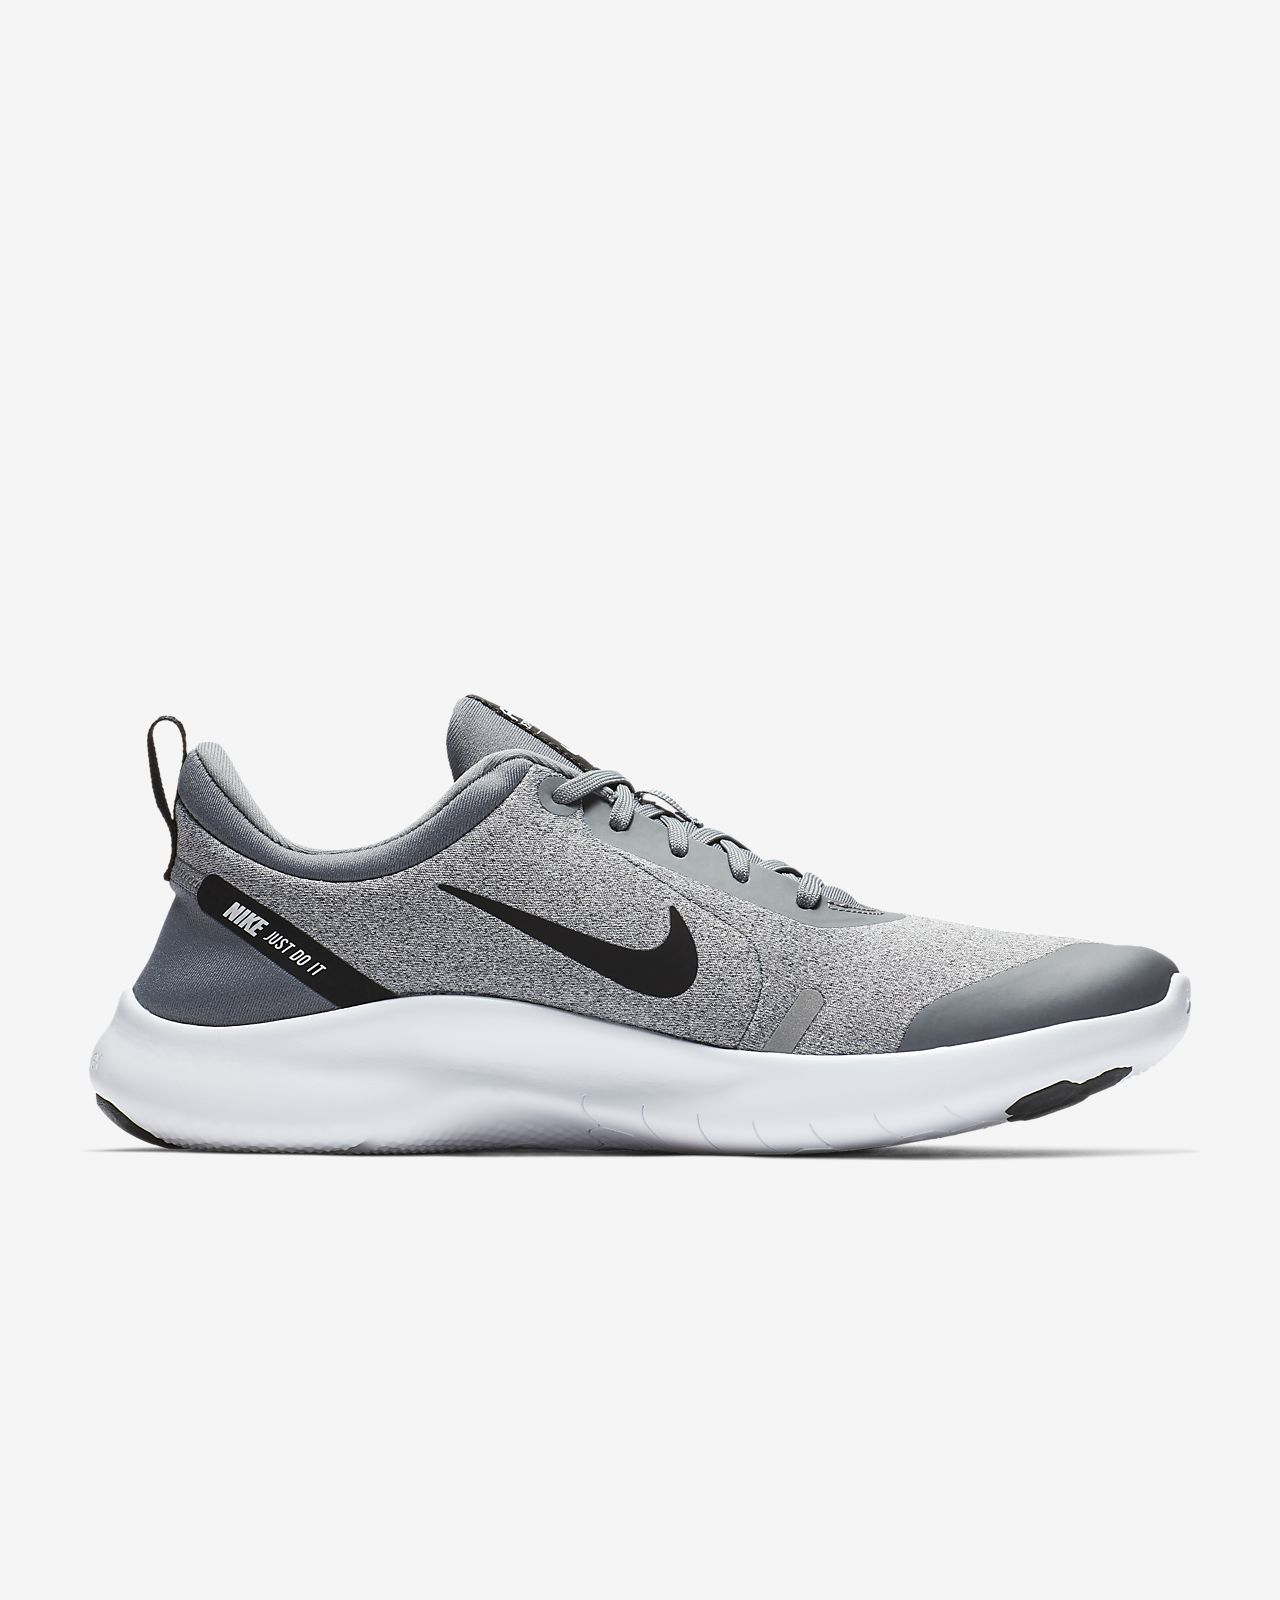 Men's Shoes Nike FLEX EXPERIENCE RN 8 Sneakers Men's Running Lifestyle ...